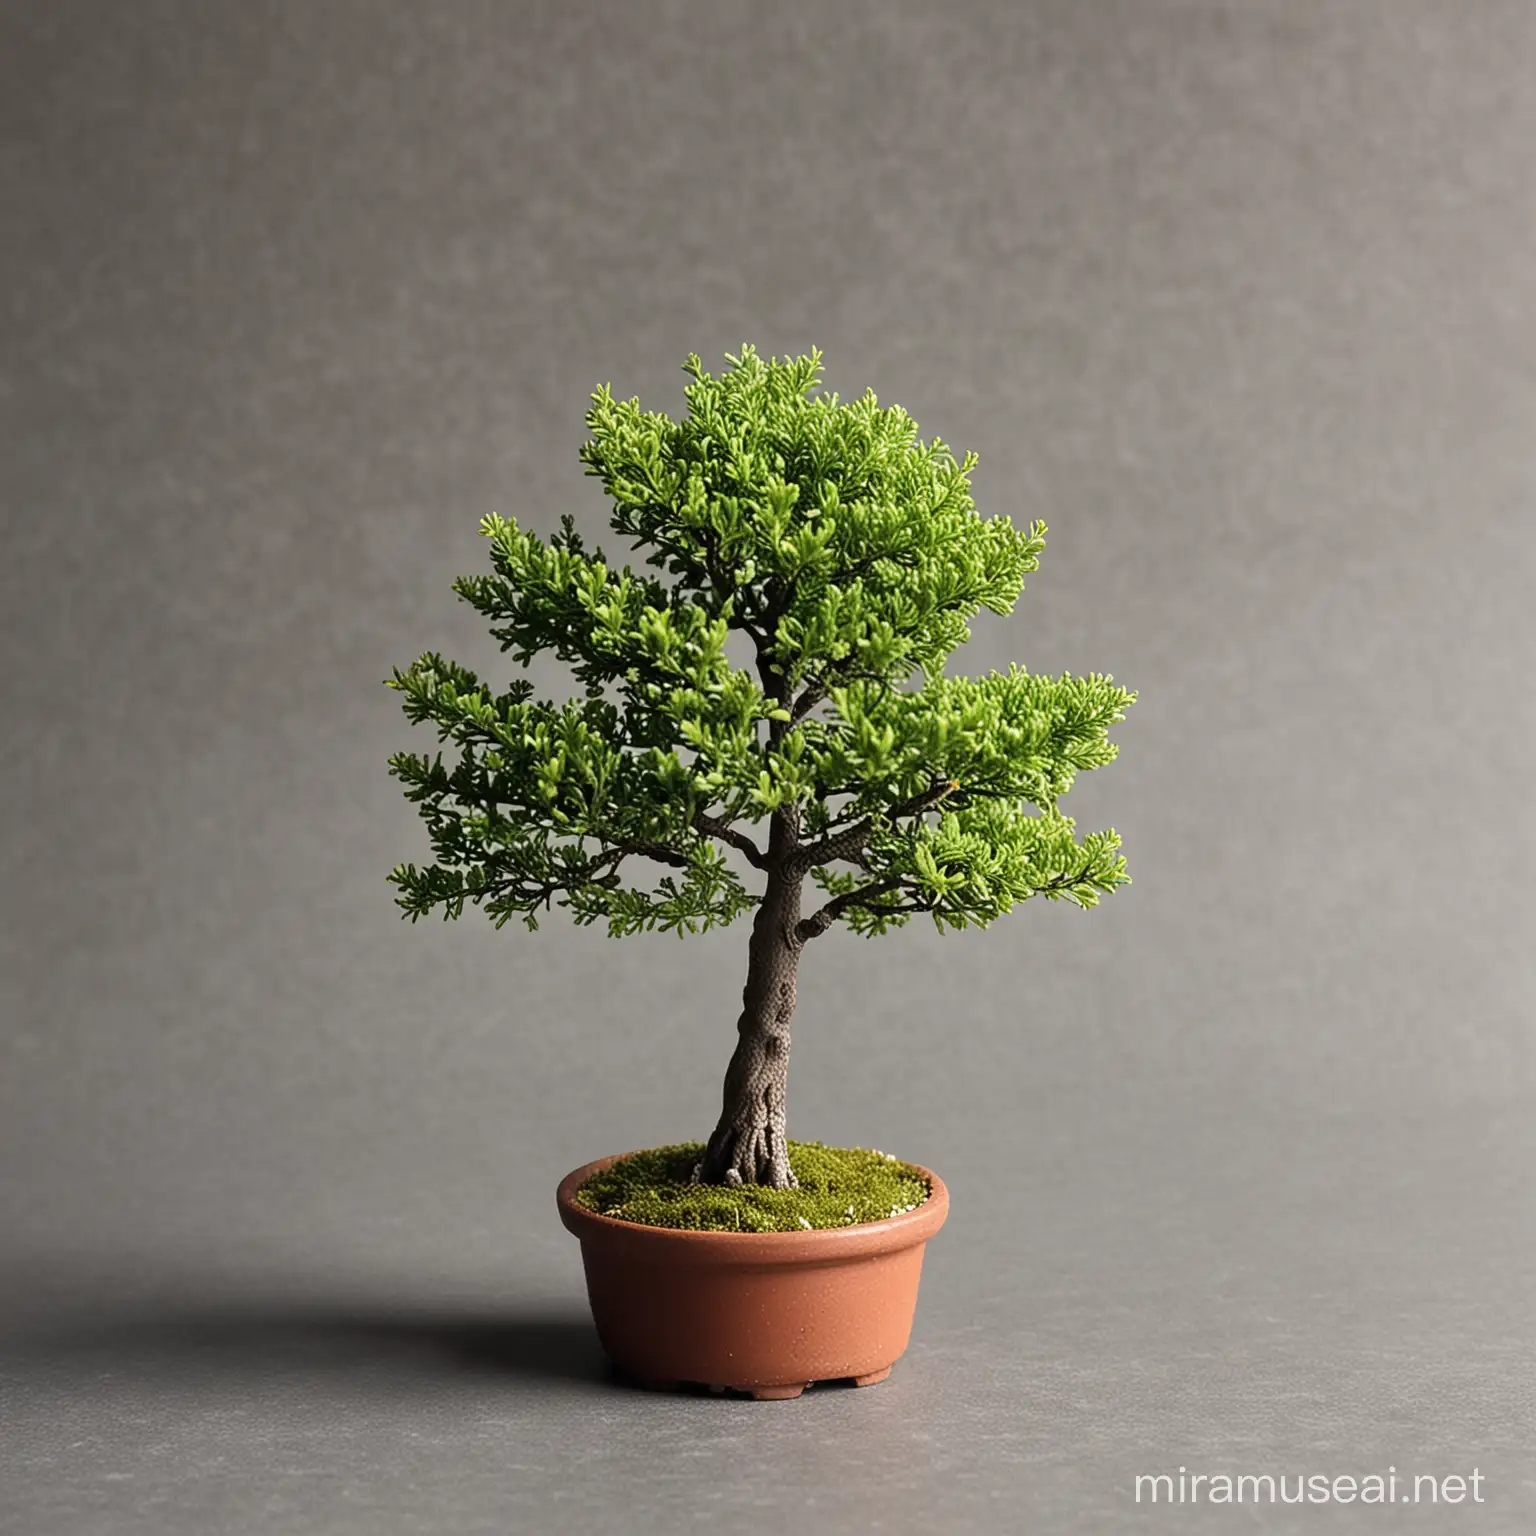 Miniature Tree in Tranquil Setting